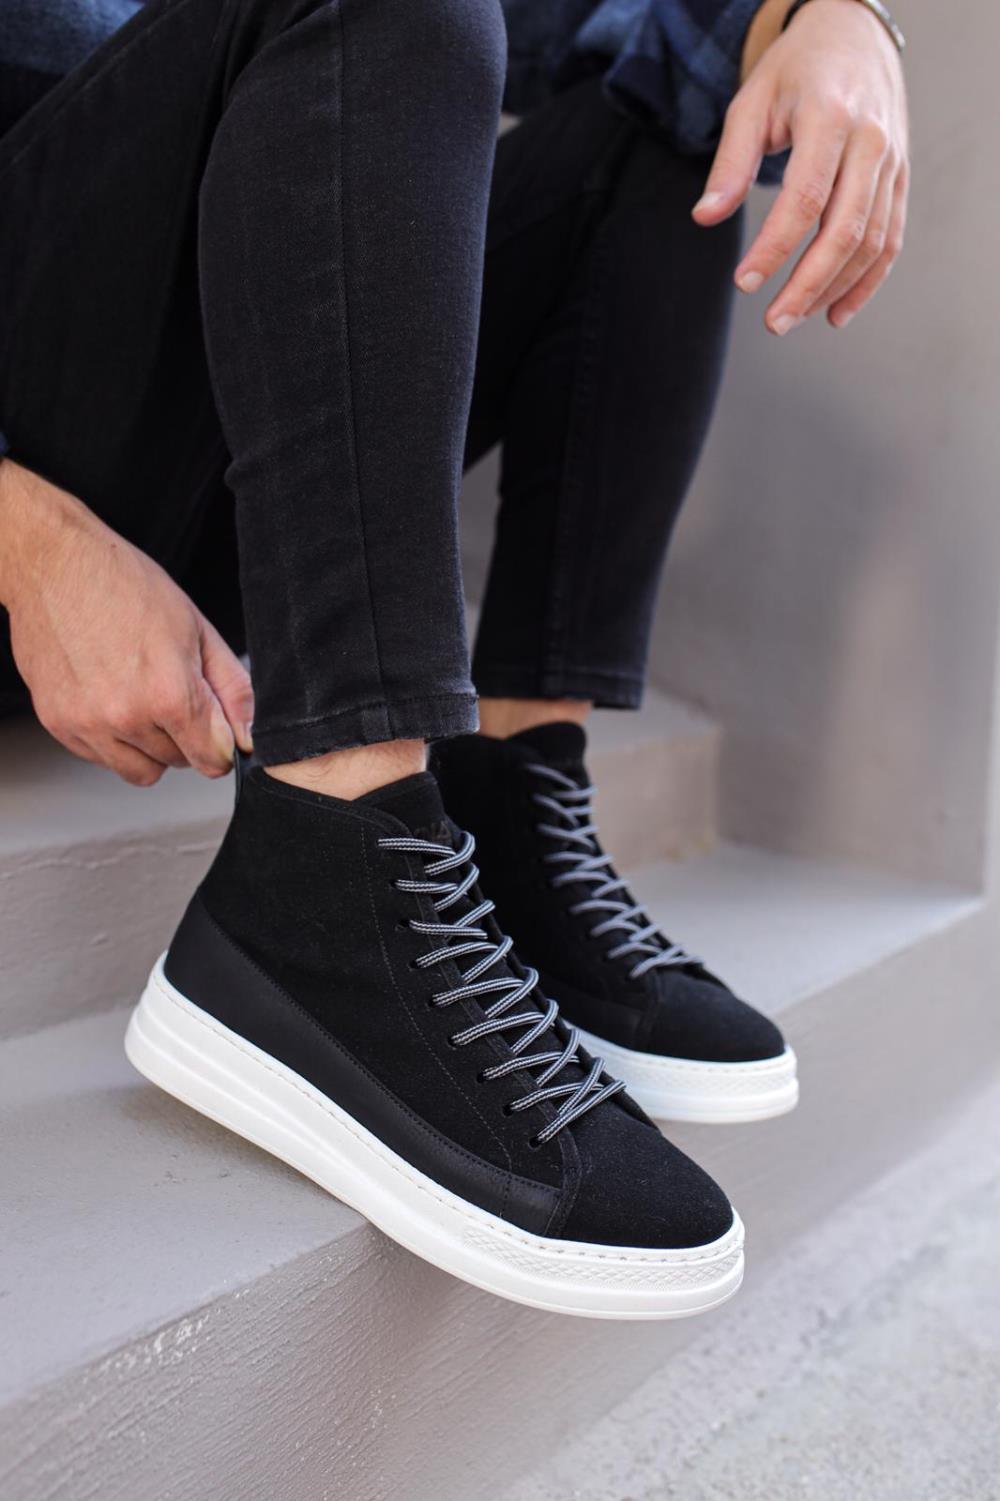 High Sole Shoes C-030 Black Suede (White Sole) - STREET MODE ™